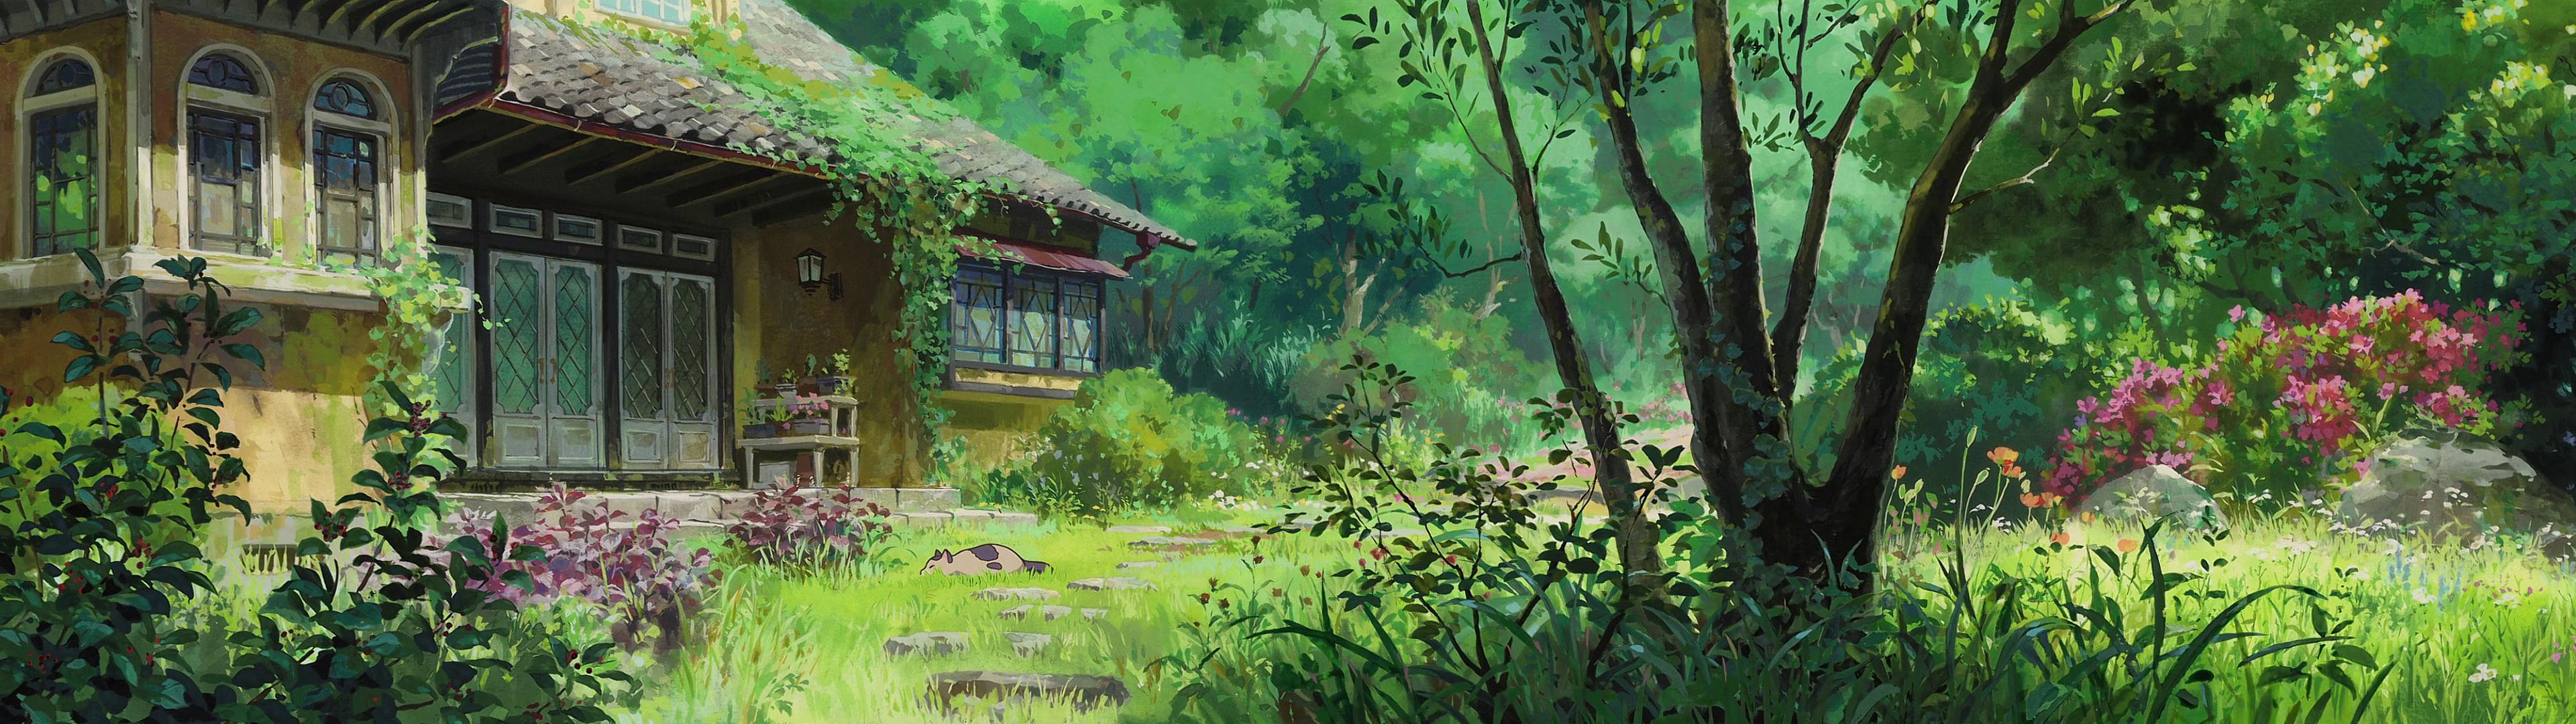 Anime Styled Nature Scene From The Secret World Of